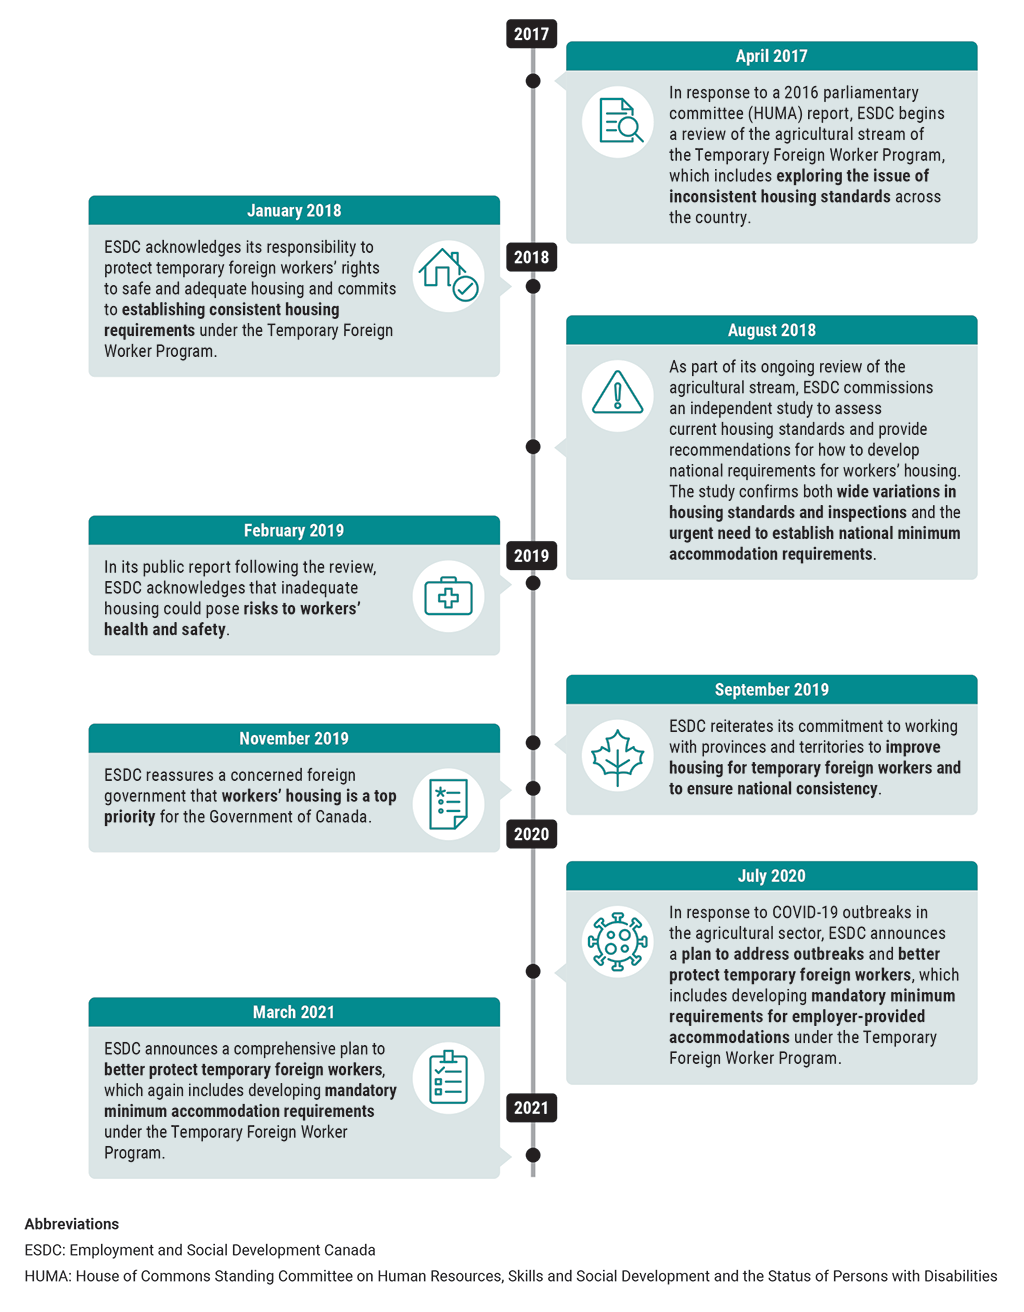 Timeline showing Employment and Social Development Canada’s commitments to improving temporary foreign workers’ living conditions